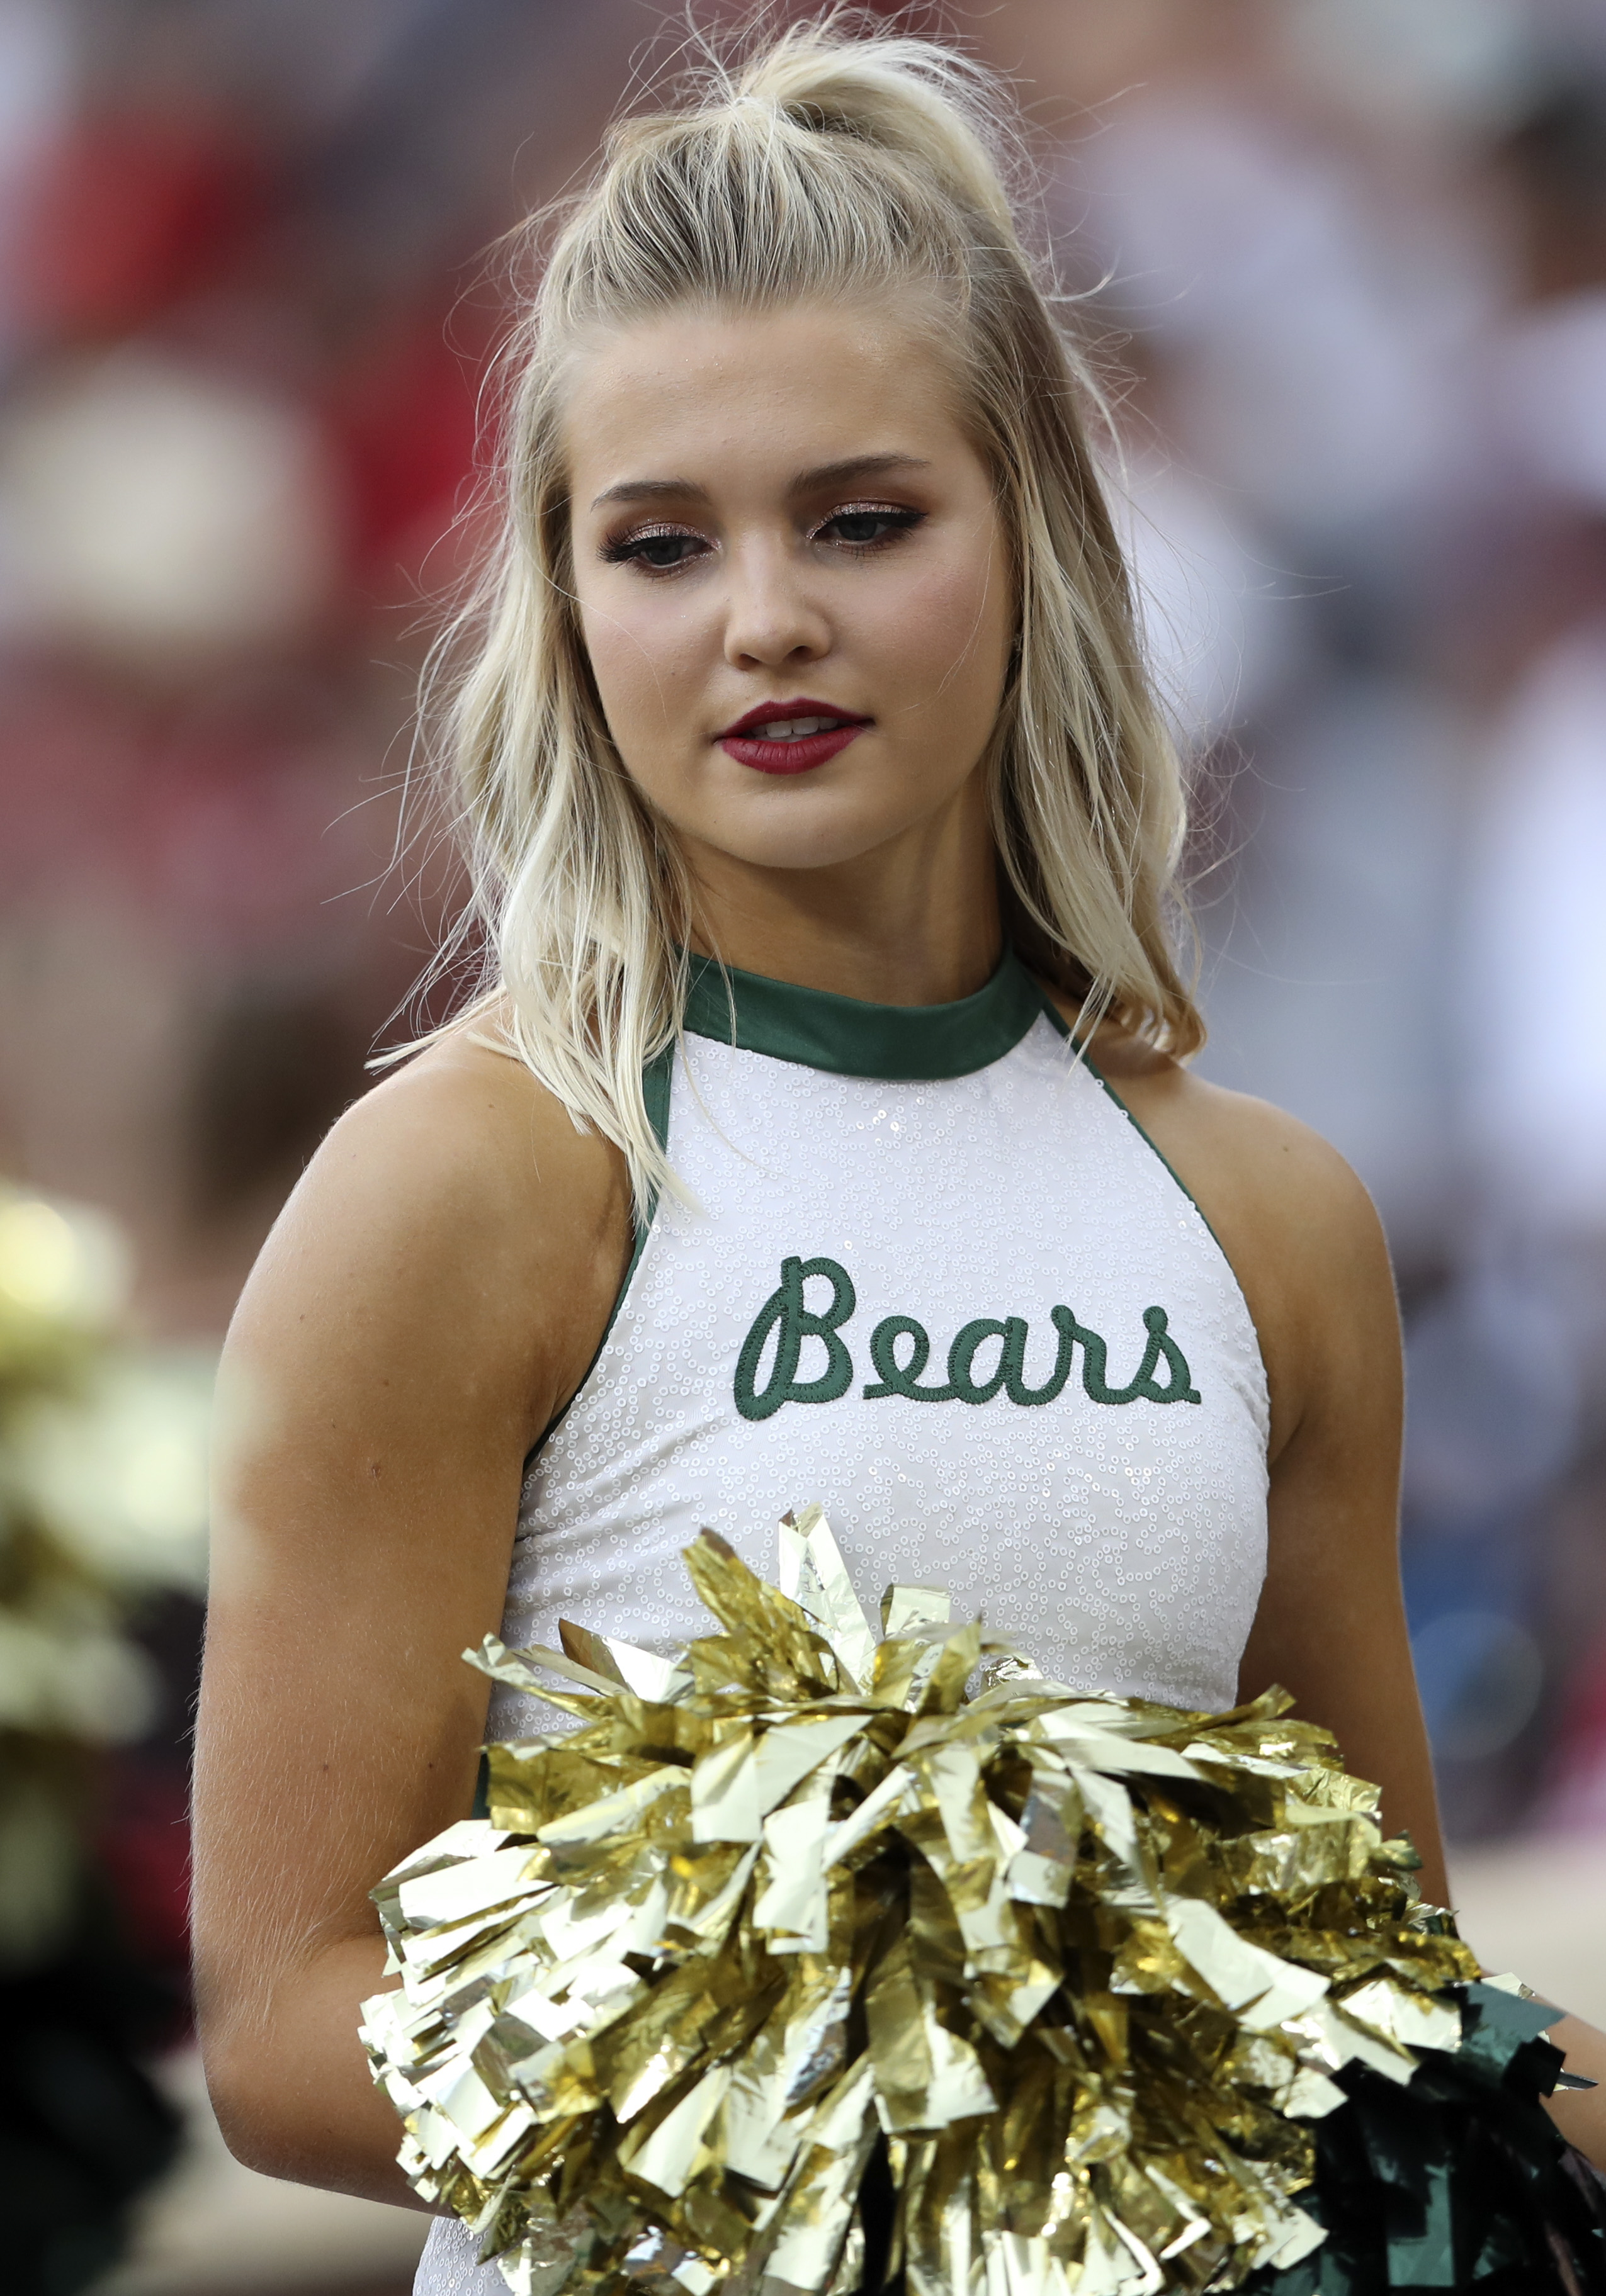 We have no objection to this cheerleader reprising her expression of infinite sadness this afternoon.